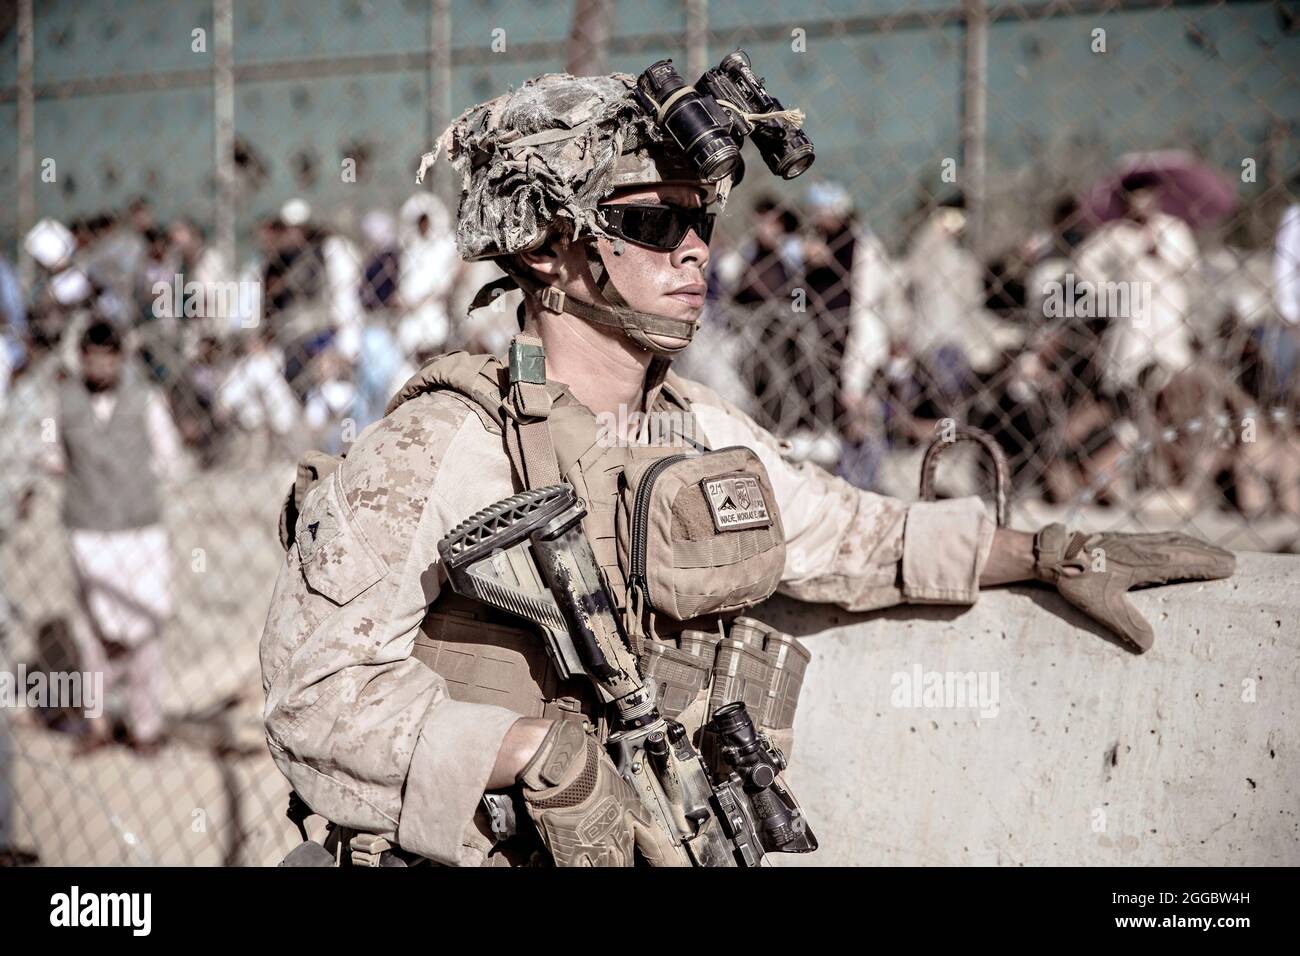 Kabul, Afghanistan. 26th Aug, 2021. A U.S. Marine with the Special Purpose Marine Air-Ground Task Force Crisis Response team, assist Afghan refugees at the Evacuation Control Center at Hamid Karzai International Airport during Operation Allies Refuge August 26, 2021 in Kabul, Afghanistan. Credit: Planetpix/Alamy Live News Stock Photo